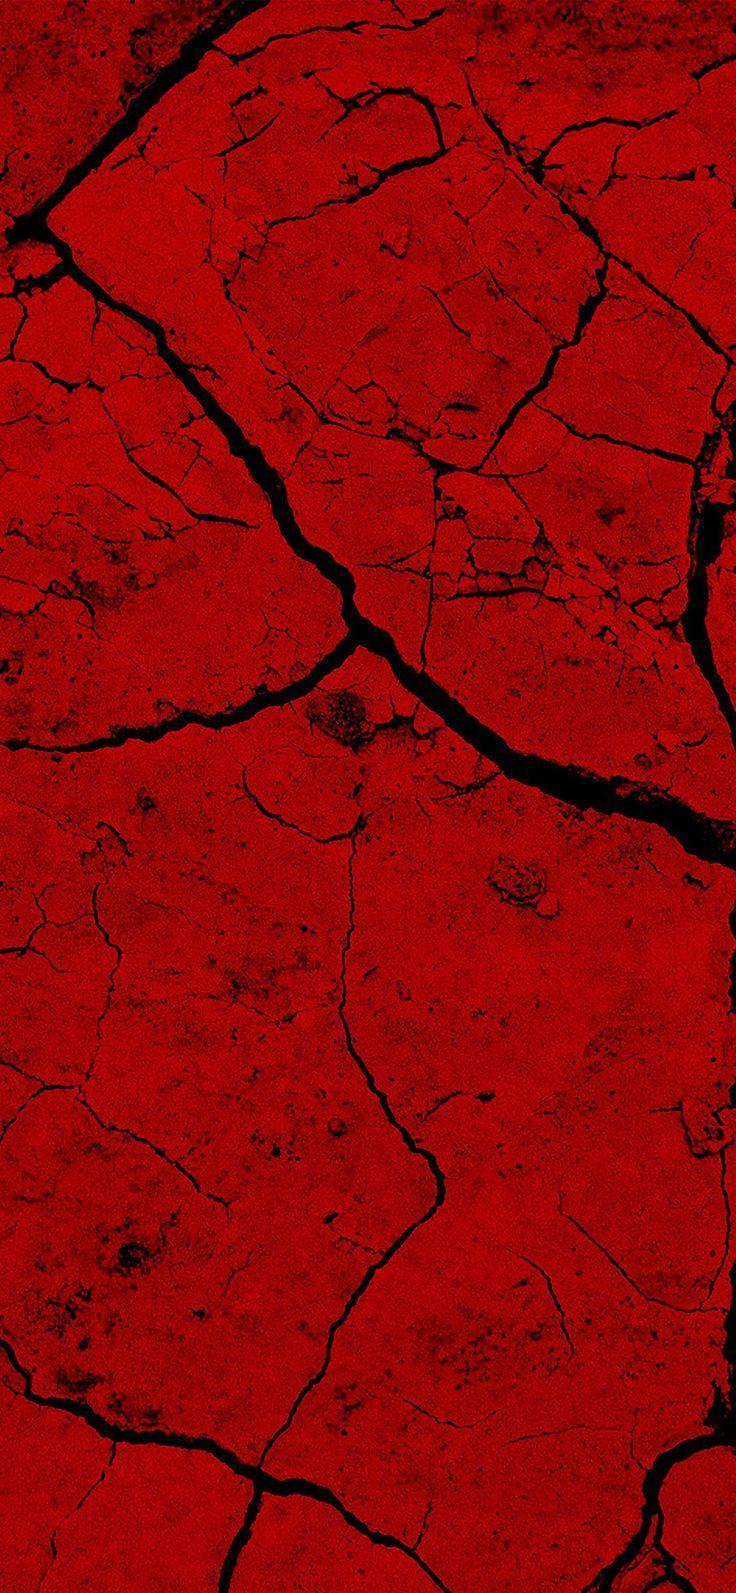 iPhoneXpapers.com | iPhone X wallpaper | oc73-red-fire-earth-nature